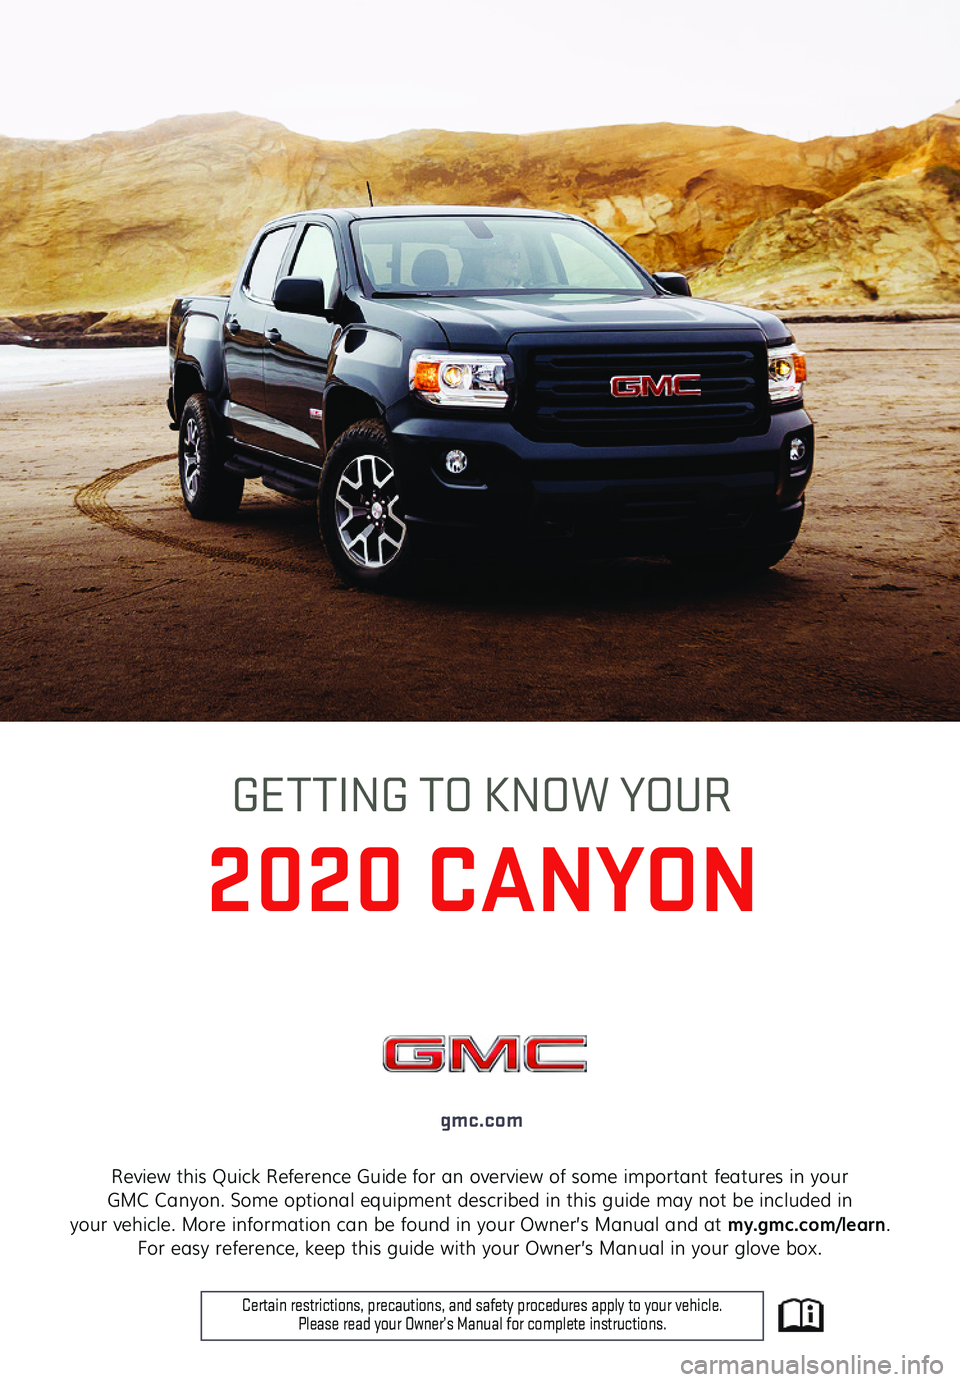 GMC CANYON 2020  Get To Know Guide 1
Review this Quick Reference Guide for an overview of some important features in your  GMC Canyon. Some optional equipment described in this guide may not be included in  your vehicle. More informati